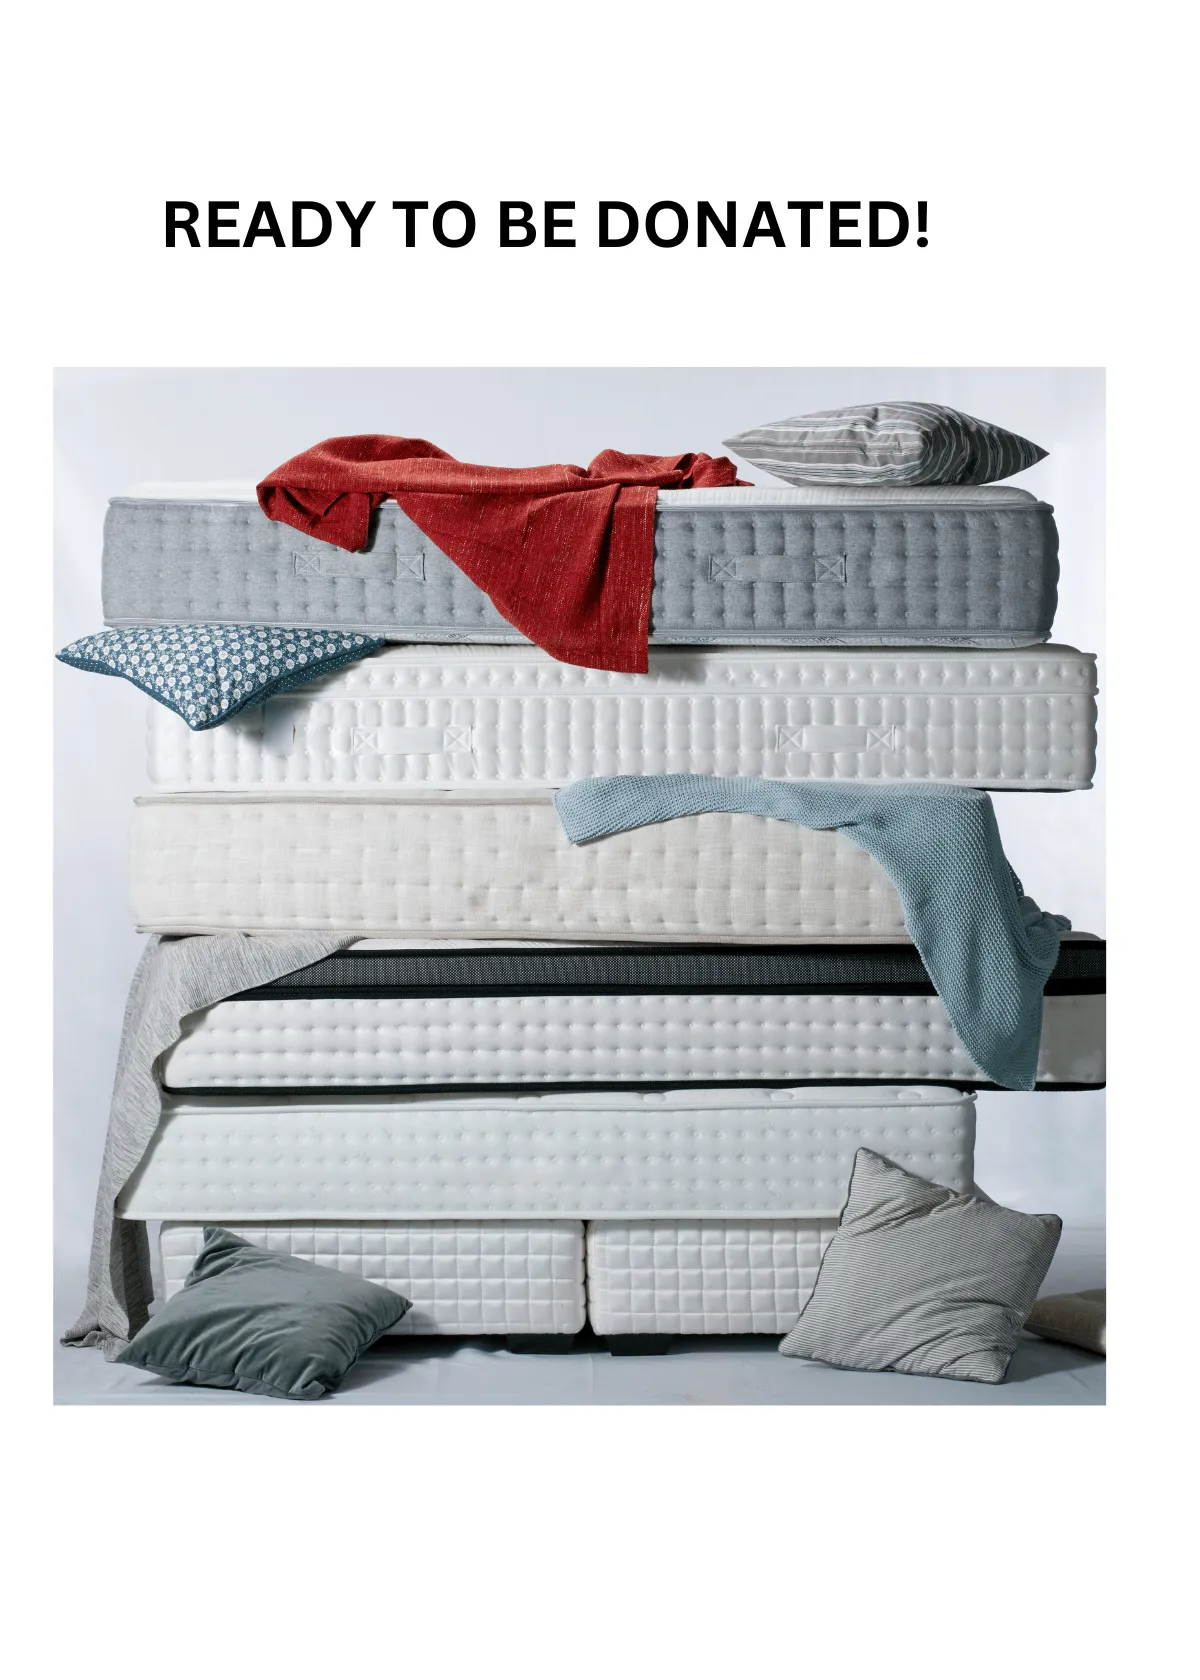 "The Ultimate Guide to Mattress Donation: A Step-by-Step Process"